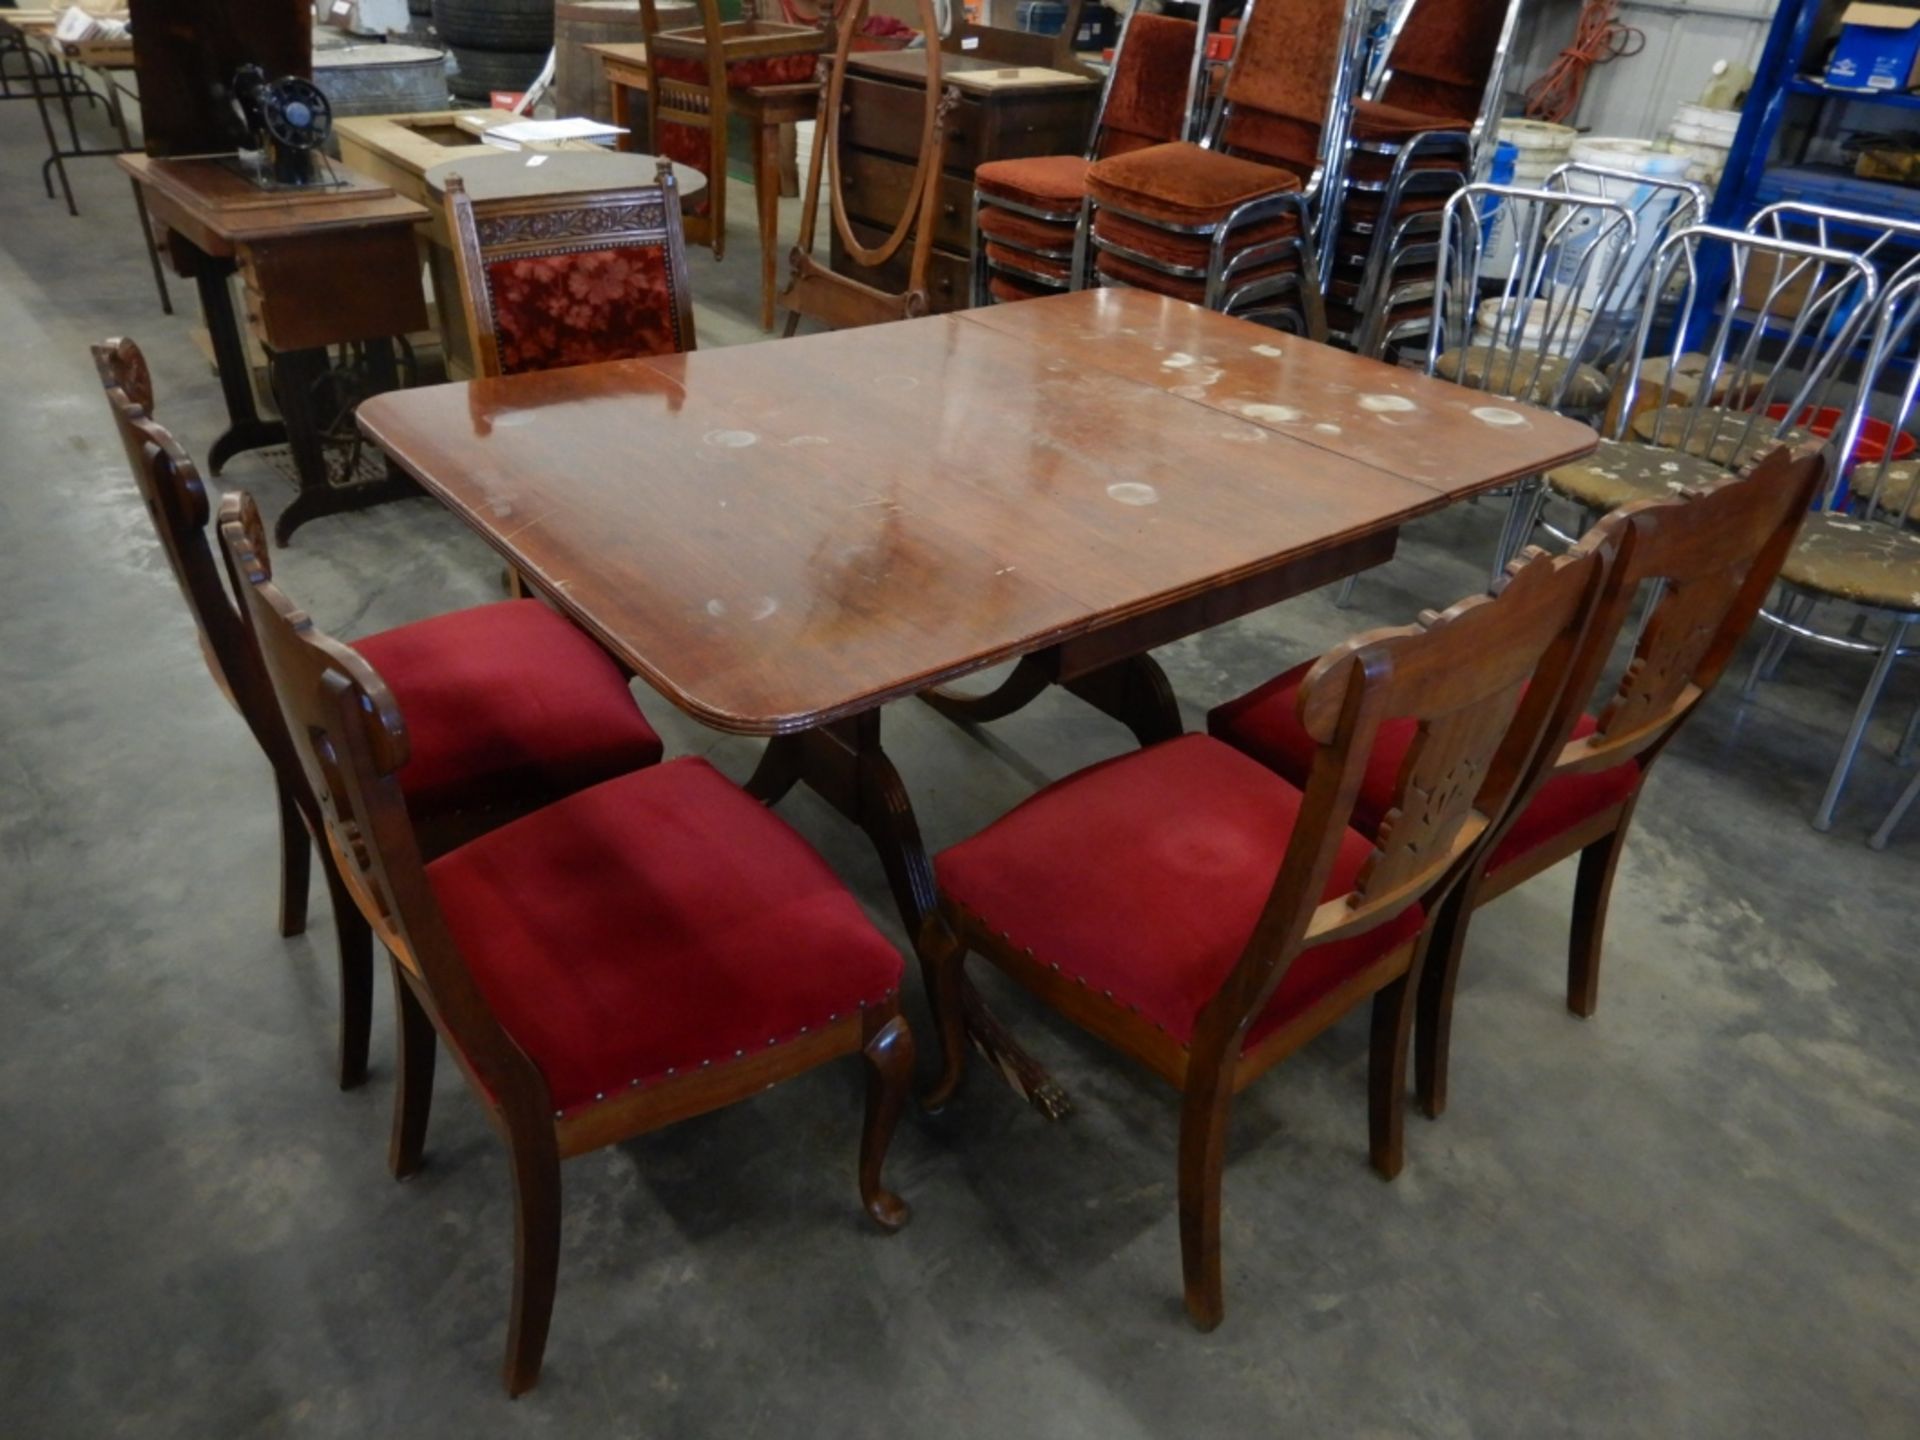 ANTIQUE DUNCAN PHYFE STYLE DROP LEAF TABLE AND CHAIRS (6)